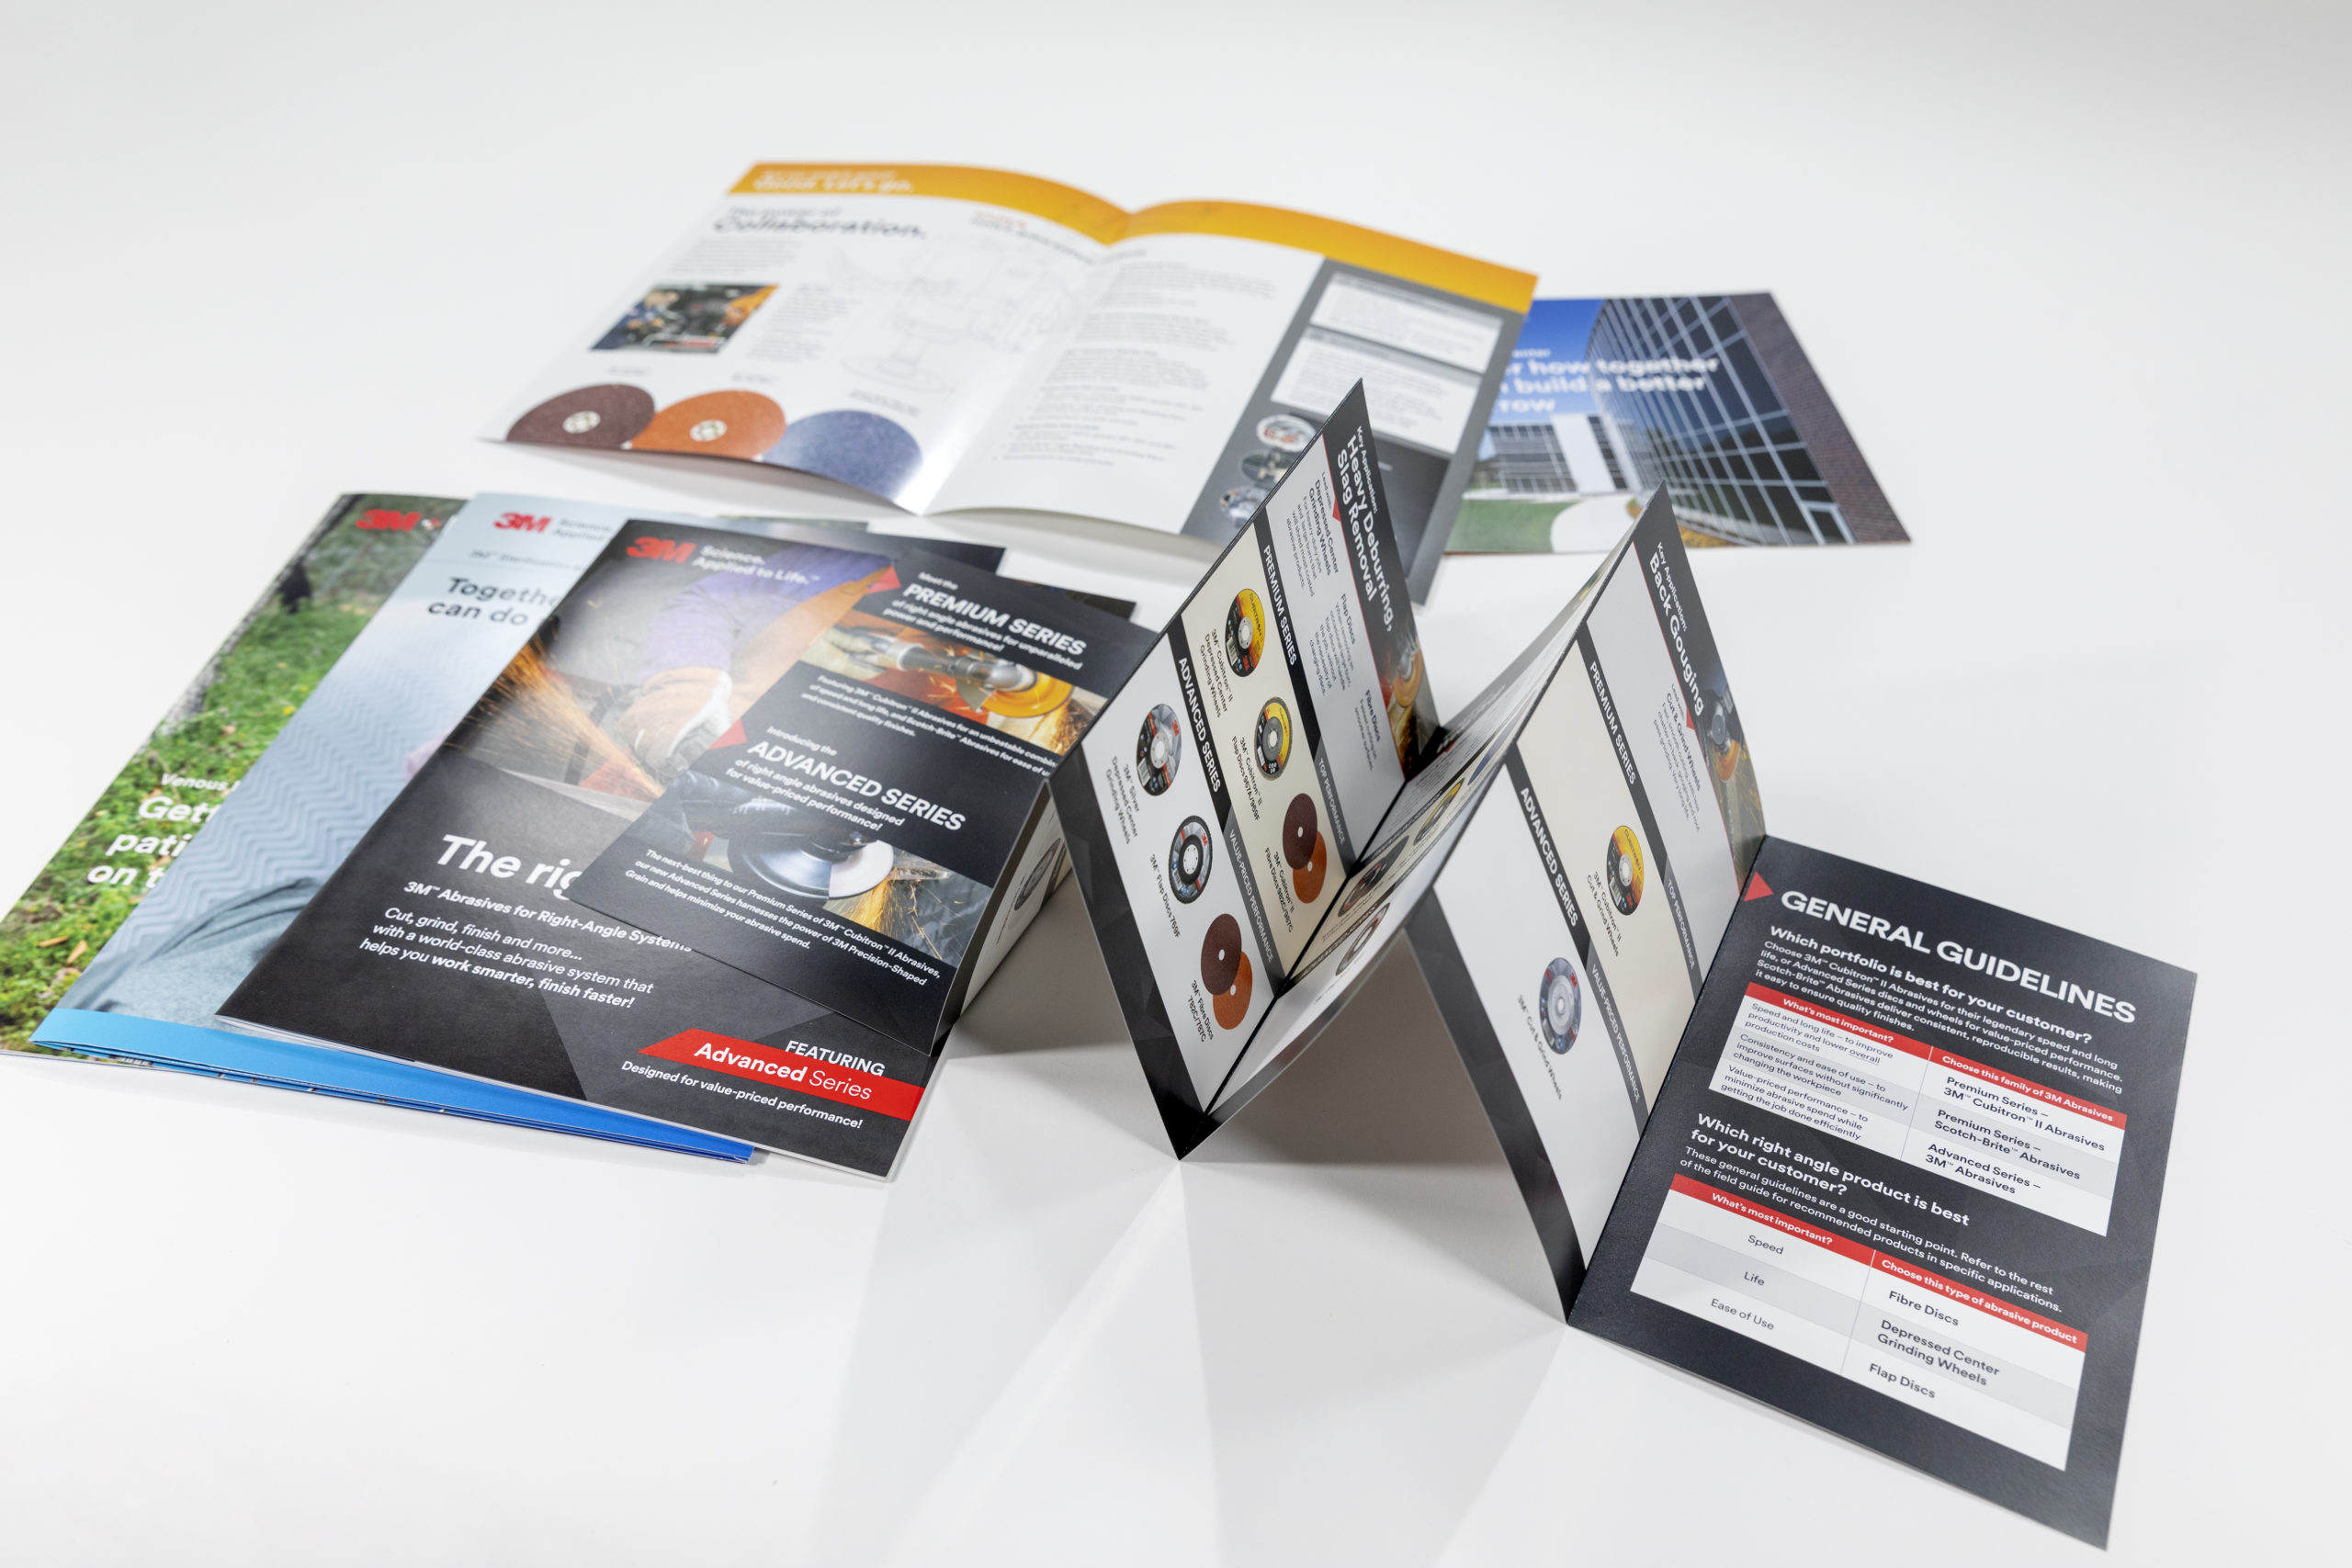 Booklets, brochures, and flyers for 3M